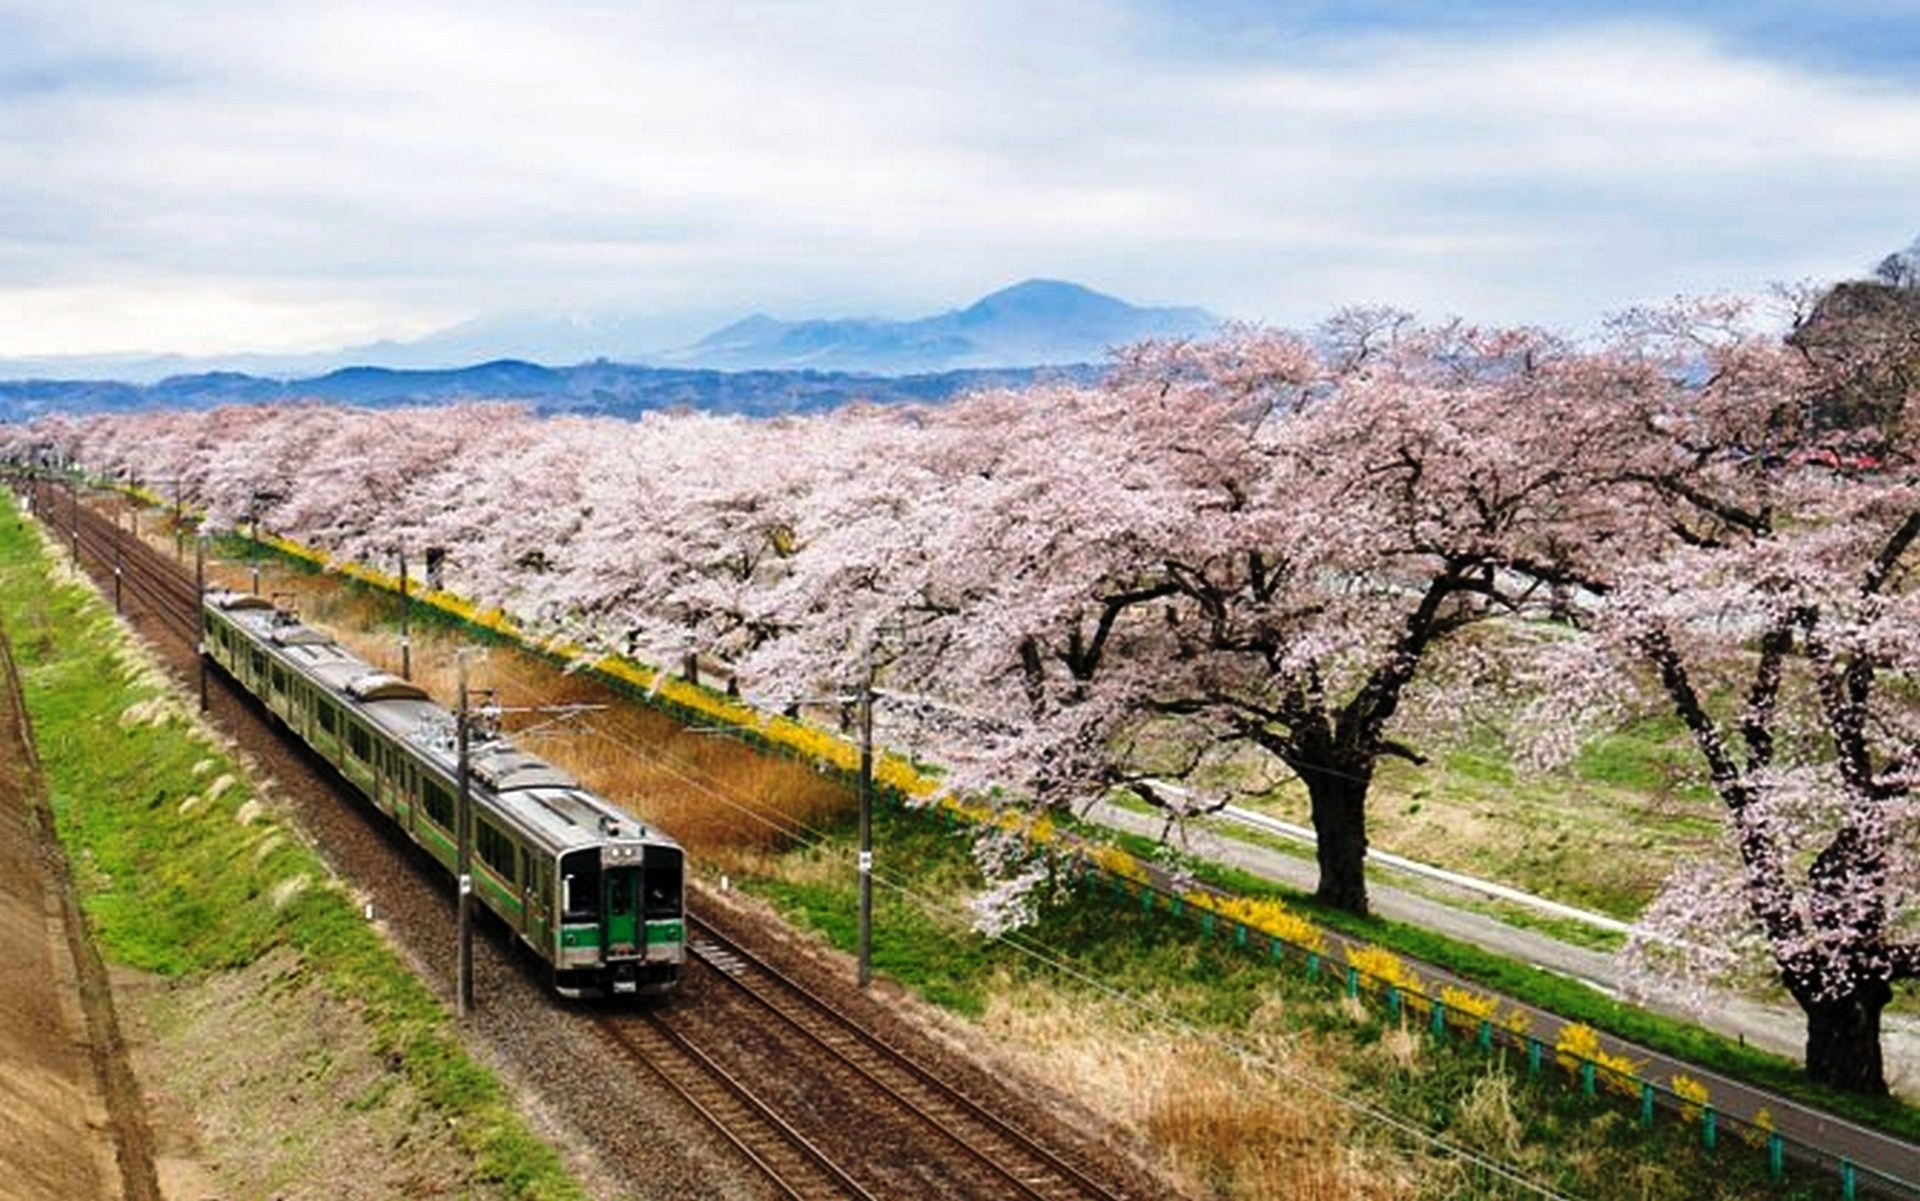 Wallpaper. Spring. photo. picture. train, Japan, the cherry blossoms, spring